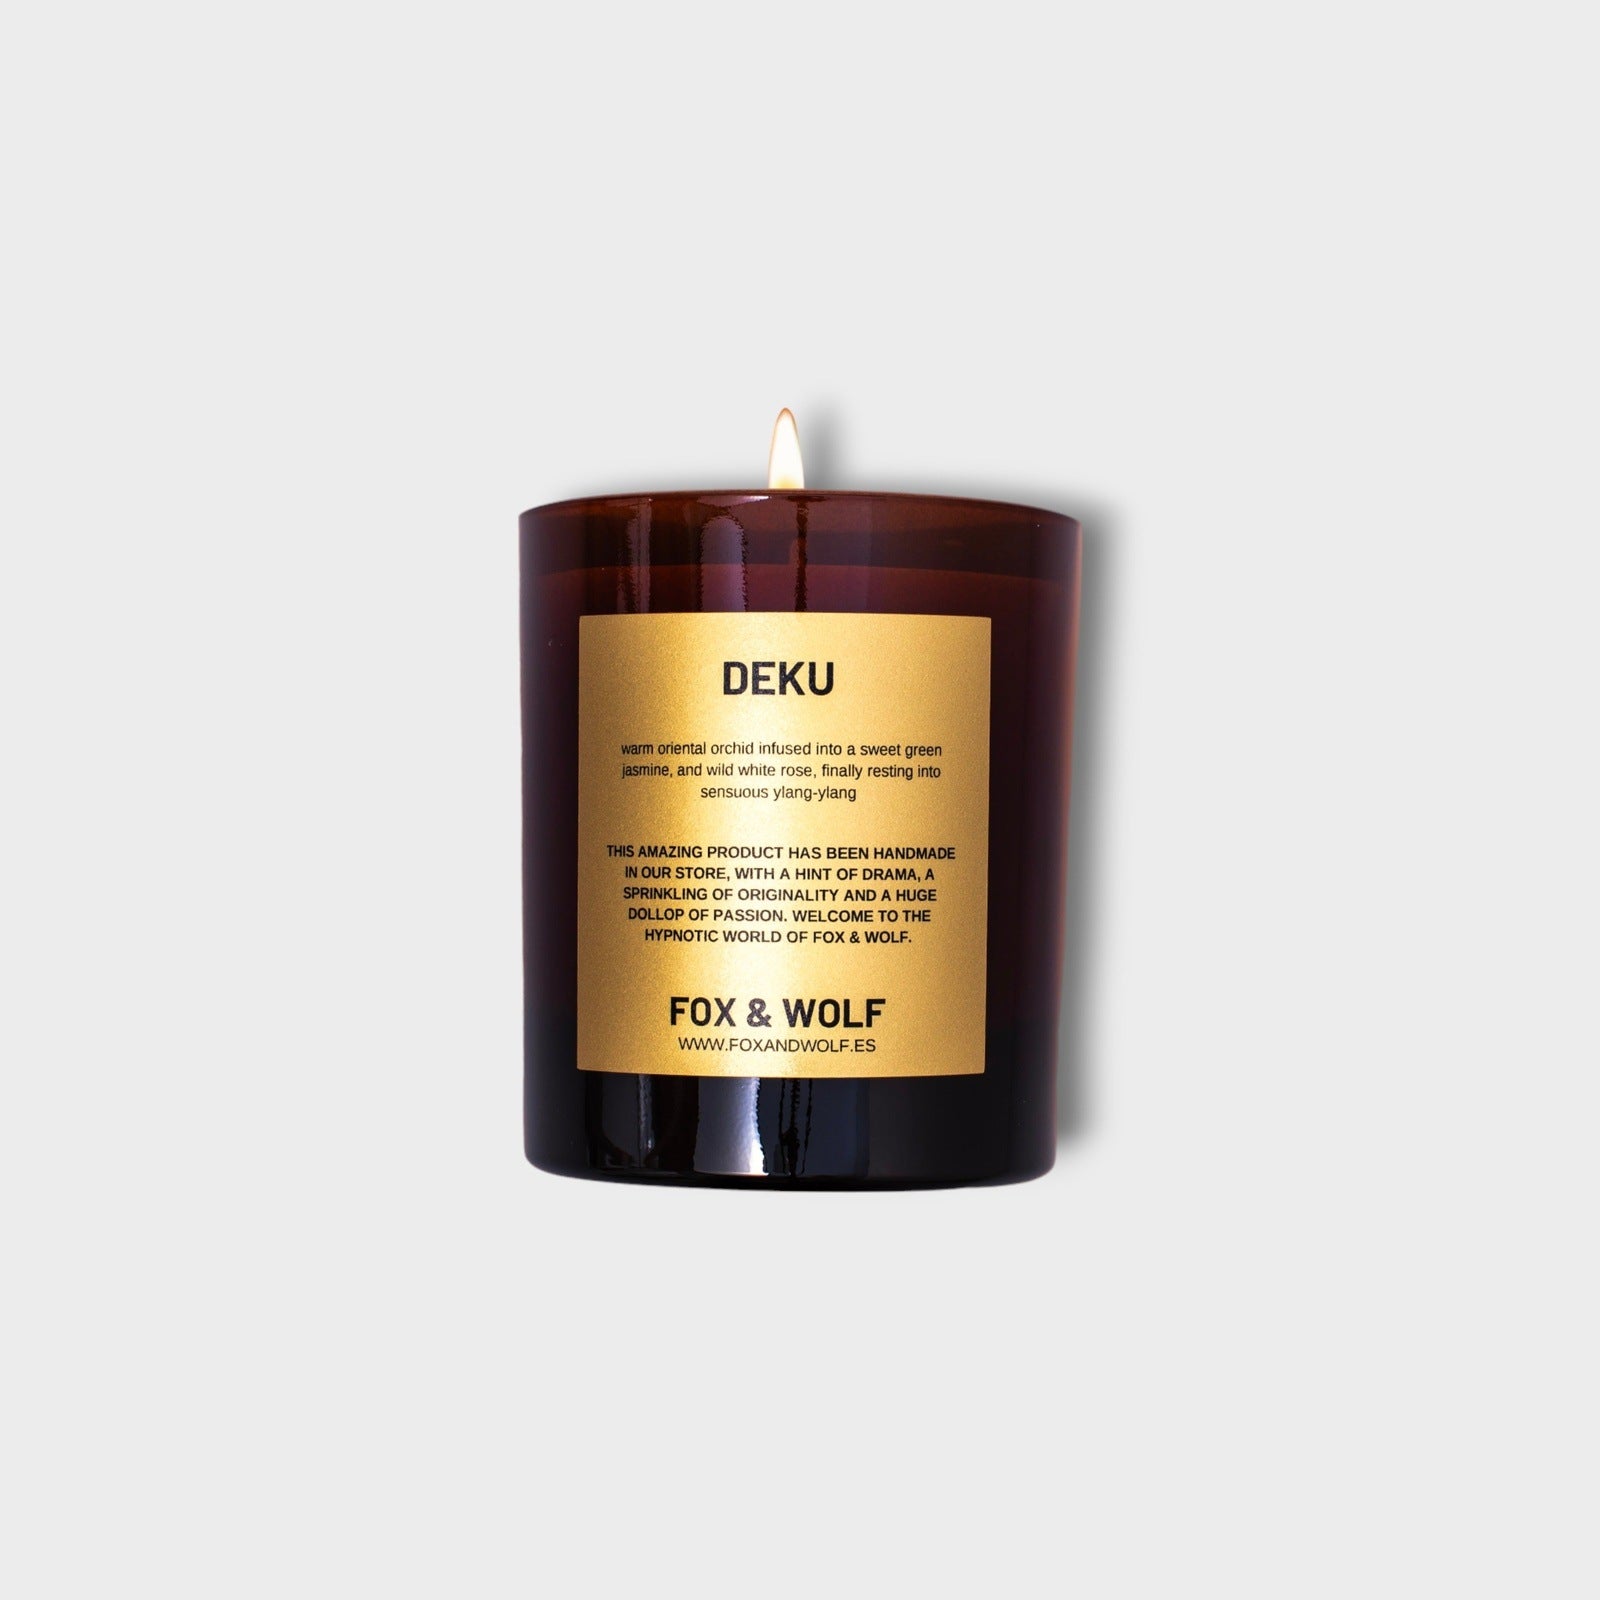 300 G DEKU SCENTED CANDLE